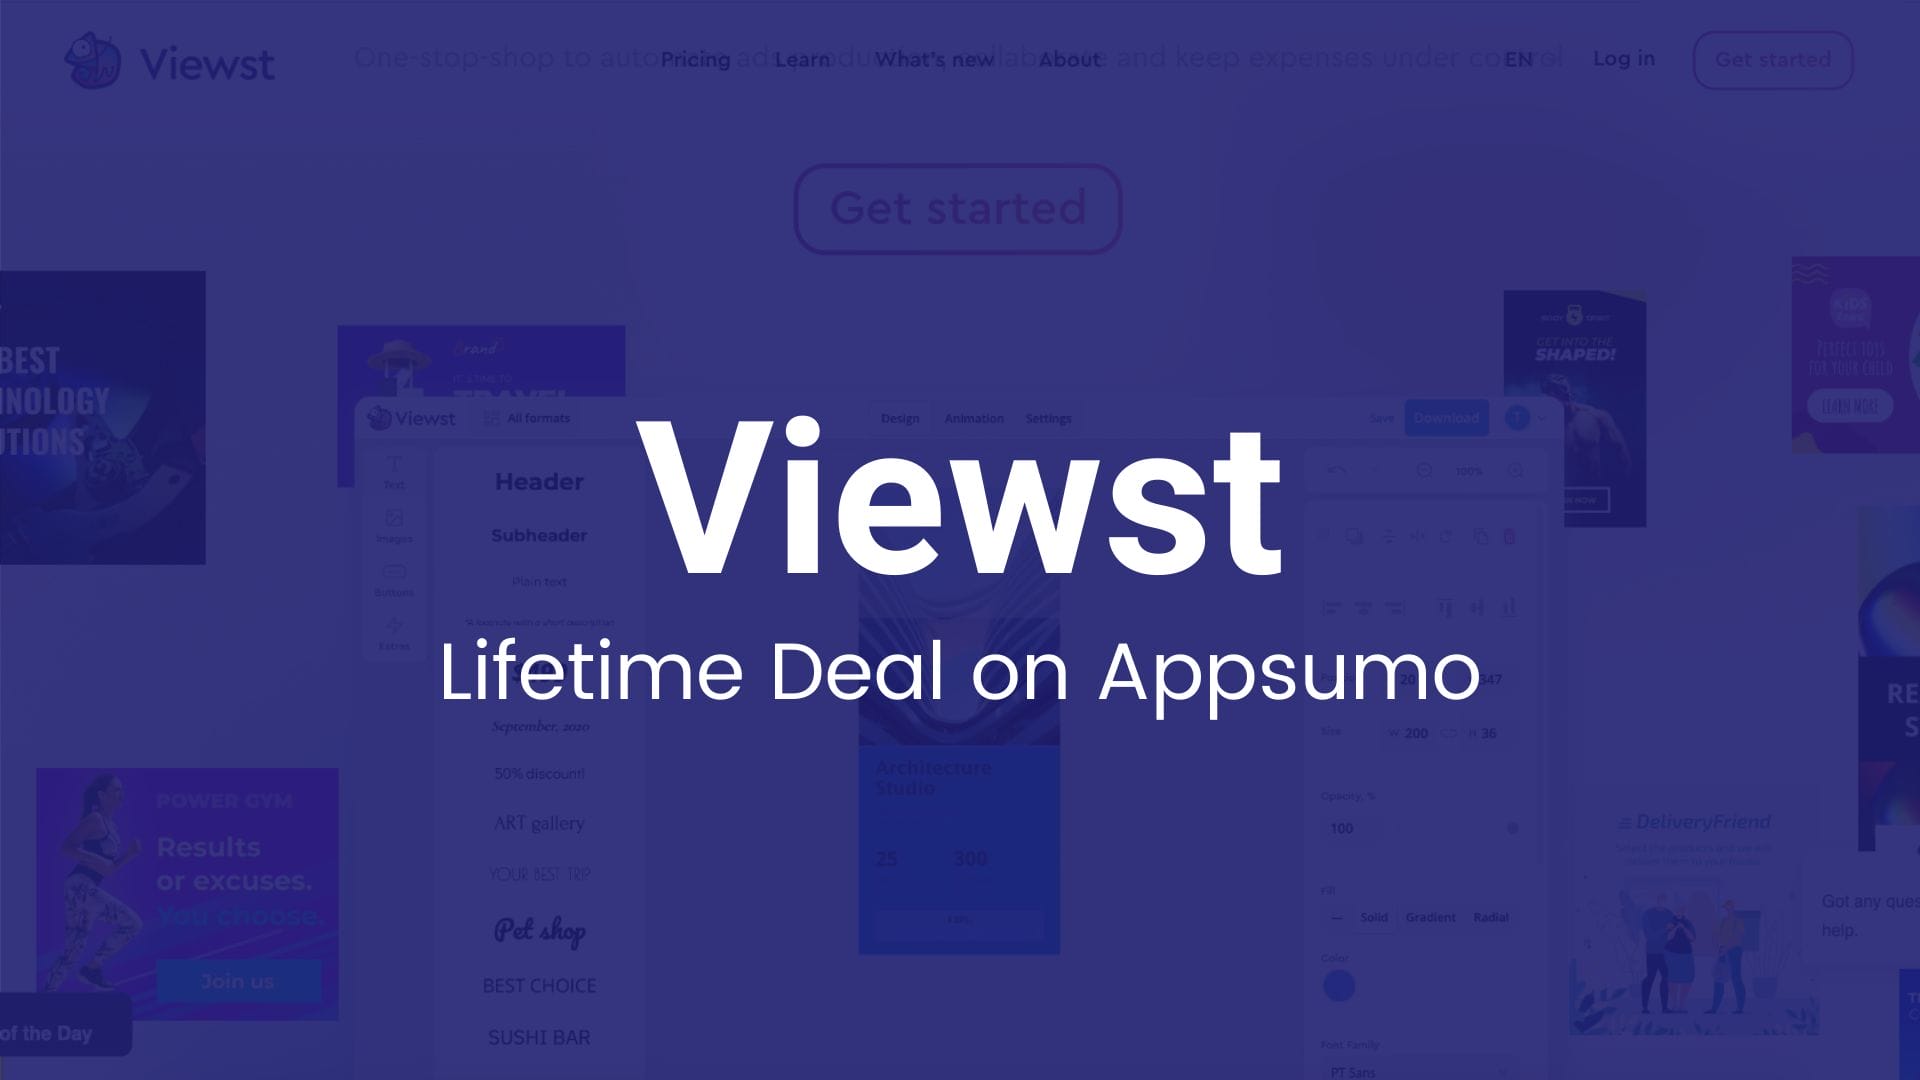 Viewst: Designing Marketing Materials Like a Pro